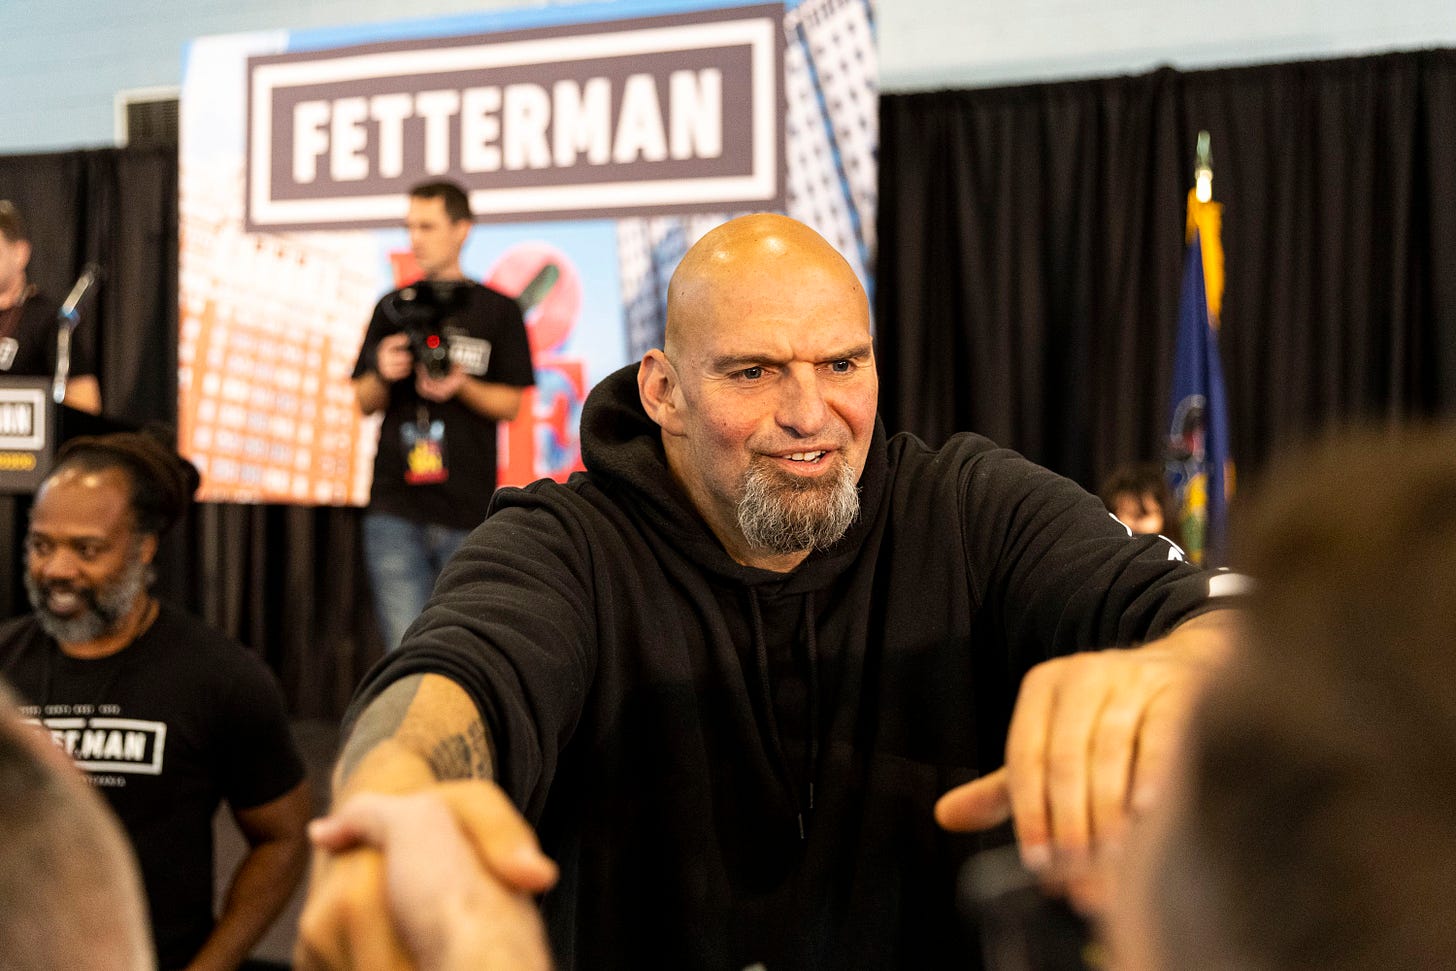 Pa. Senate race: John Fetterman rallied in Philly Saturday, his first  public event in the city